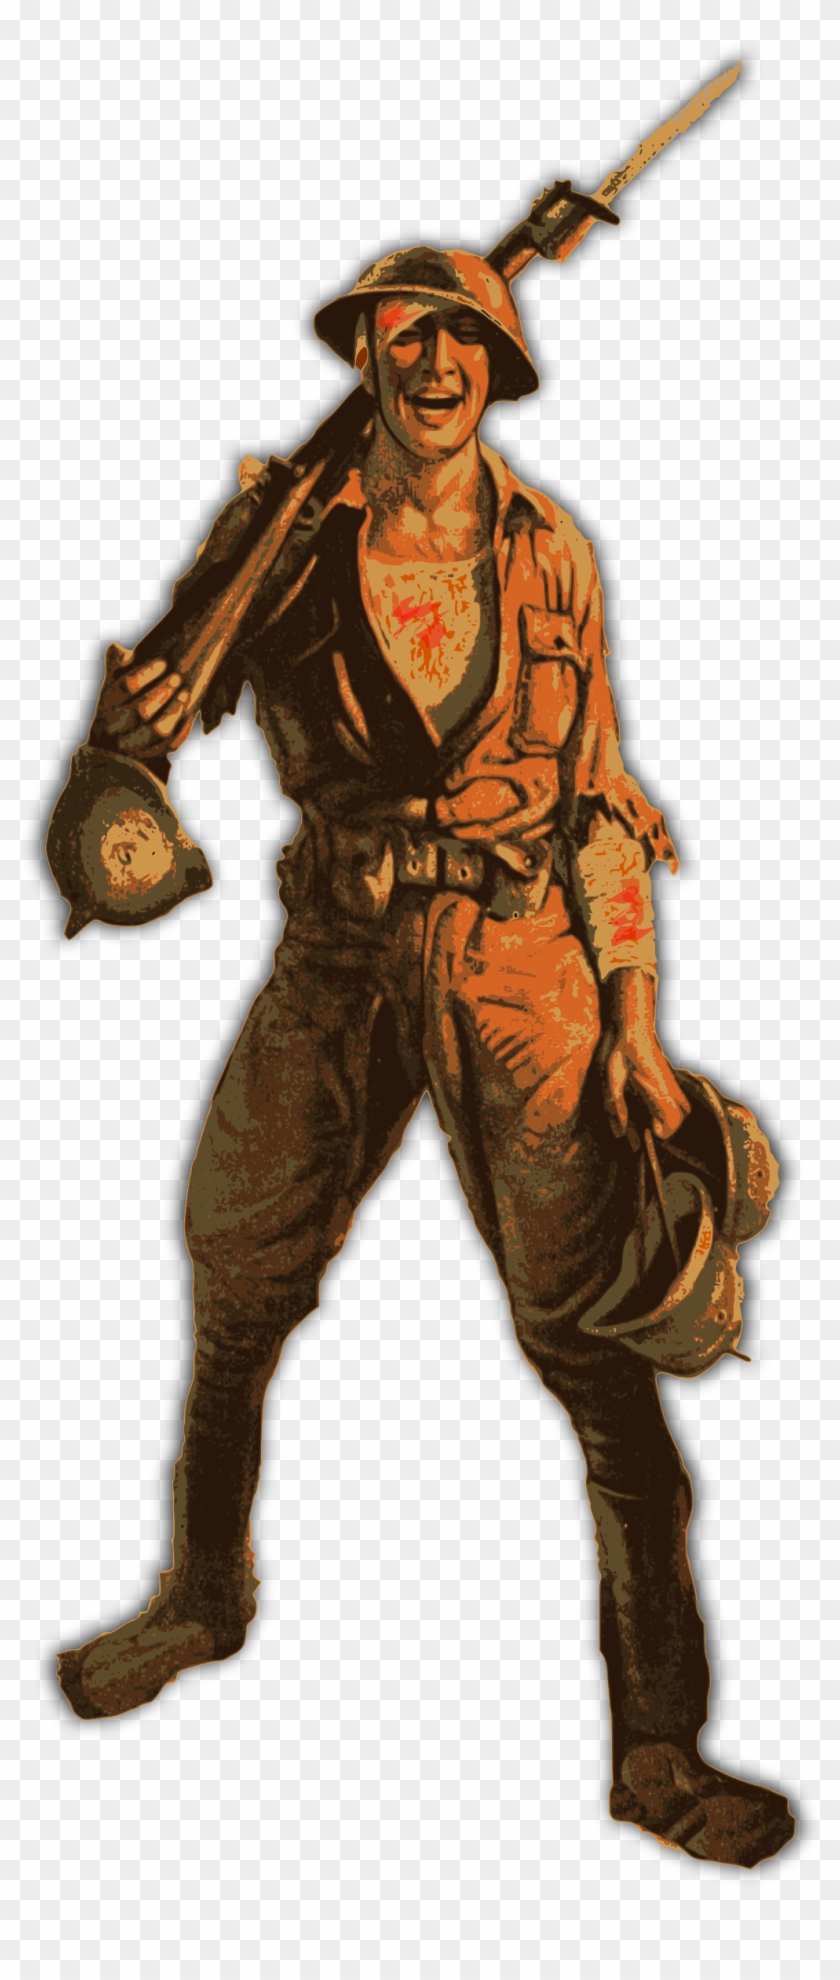 This Free Icons Png Design Of Orange World War One - Thought We Couldn T Fight Clipart #4179520